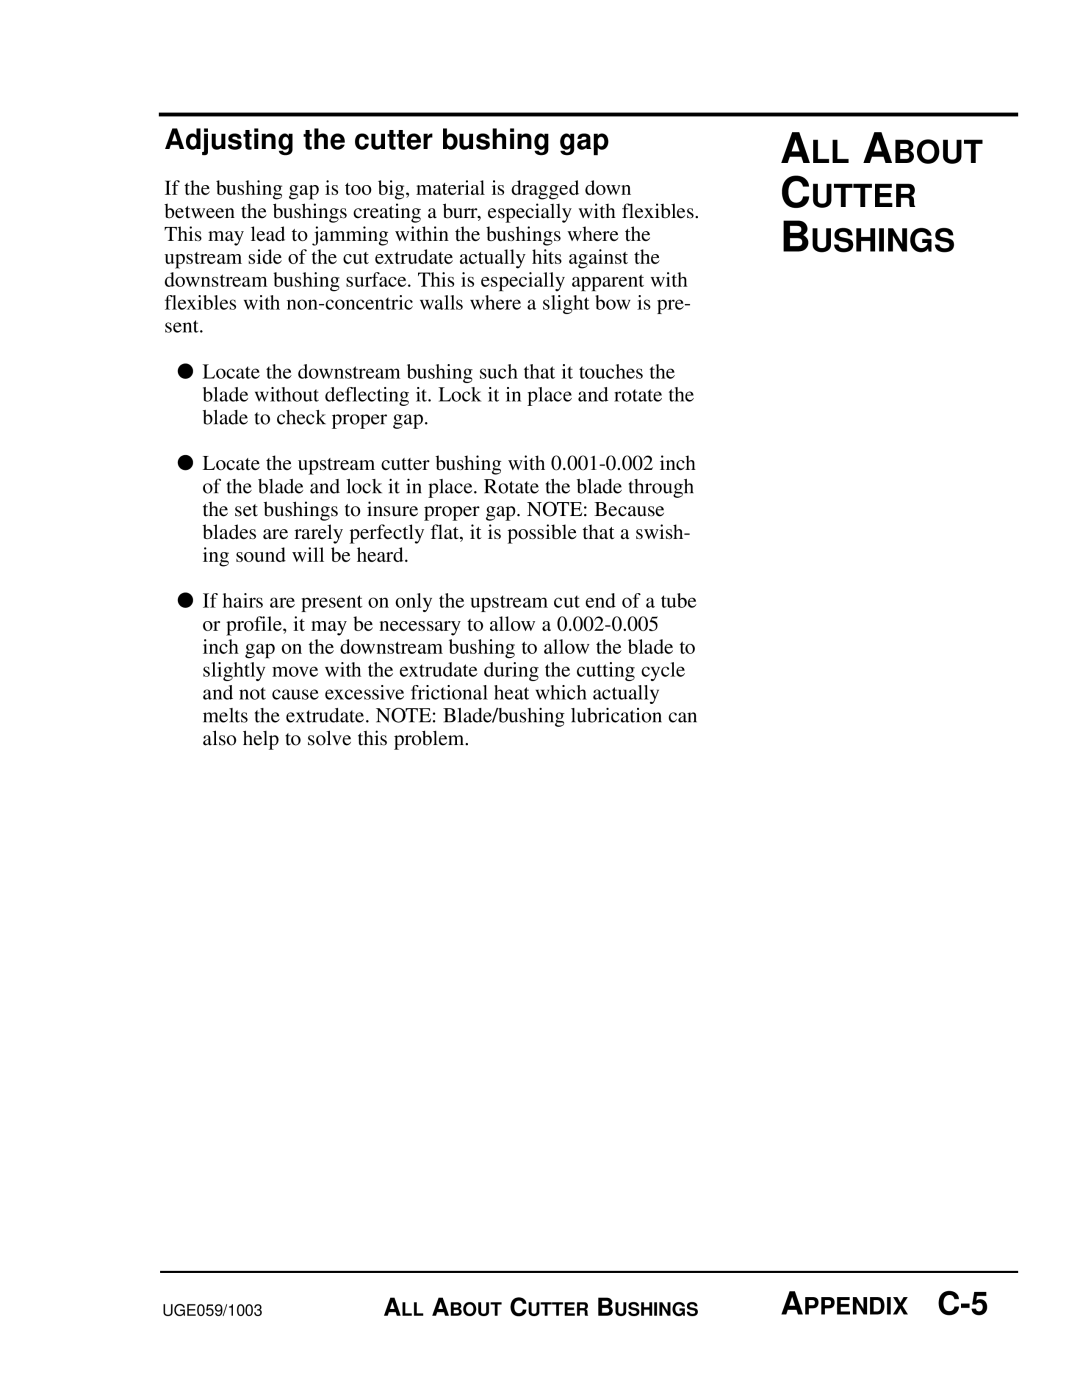 Conair SC-5 manual Adjusting the cutter bushing gap, APPENDIX C-5, All About Cutter Bushings 